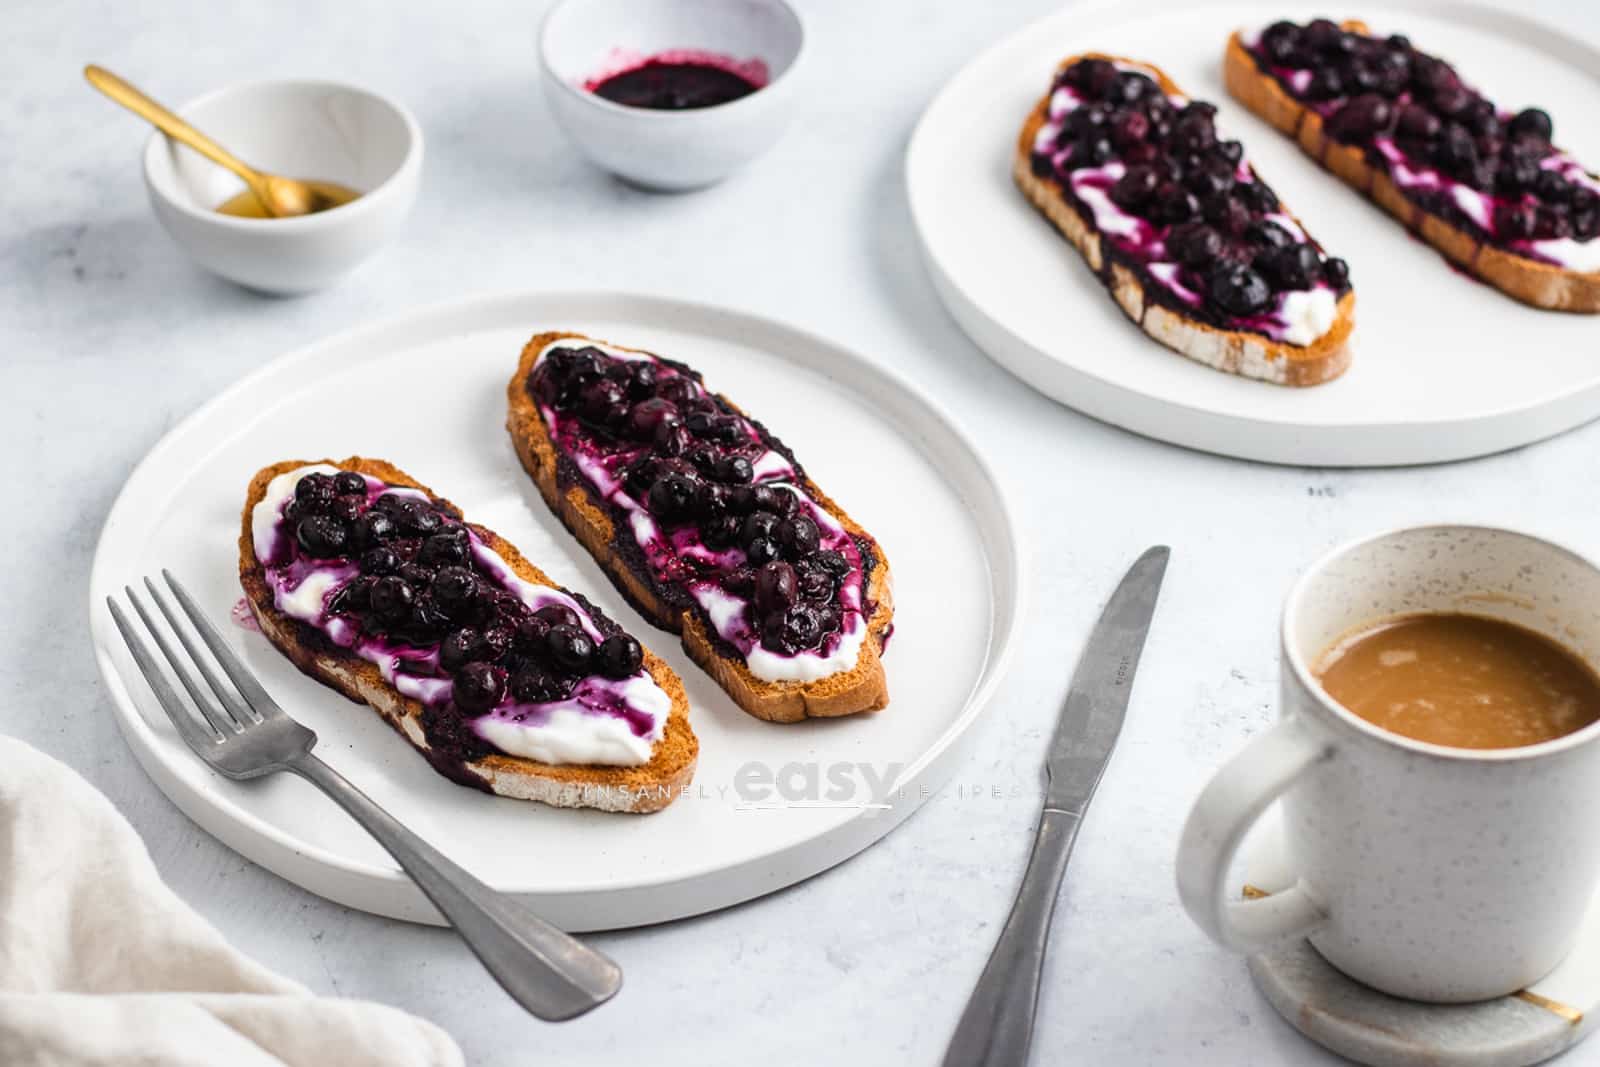 photo of 2 white plates with 2 servings of blueberry toast on each plate. there is also a fork, knife, and mug of coffee in the foreground, and a small white bowl of honey and blueberry jam in the background